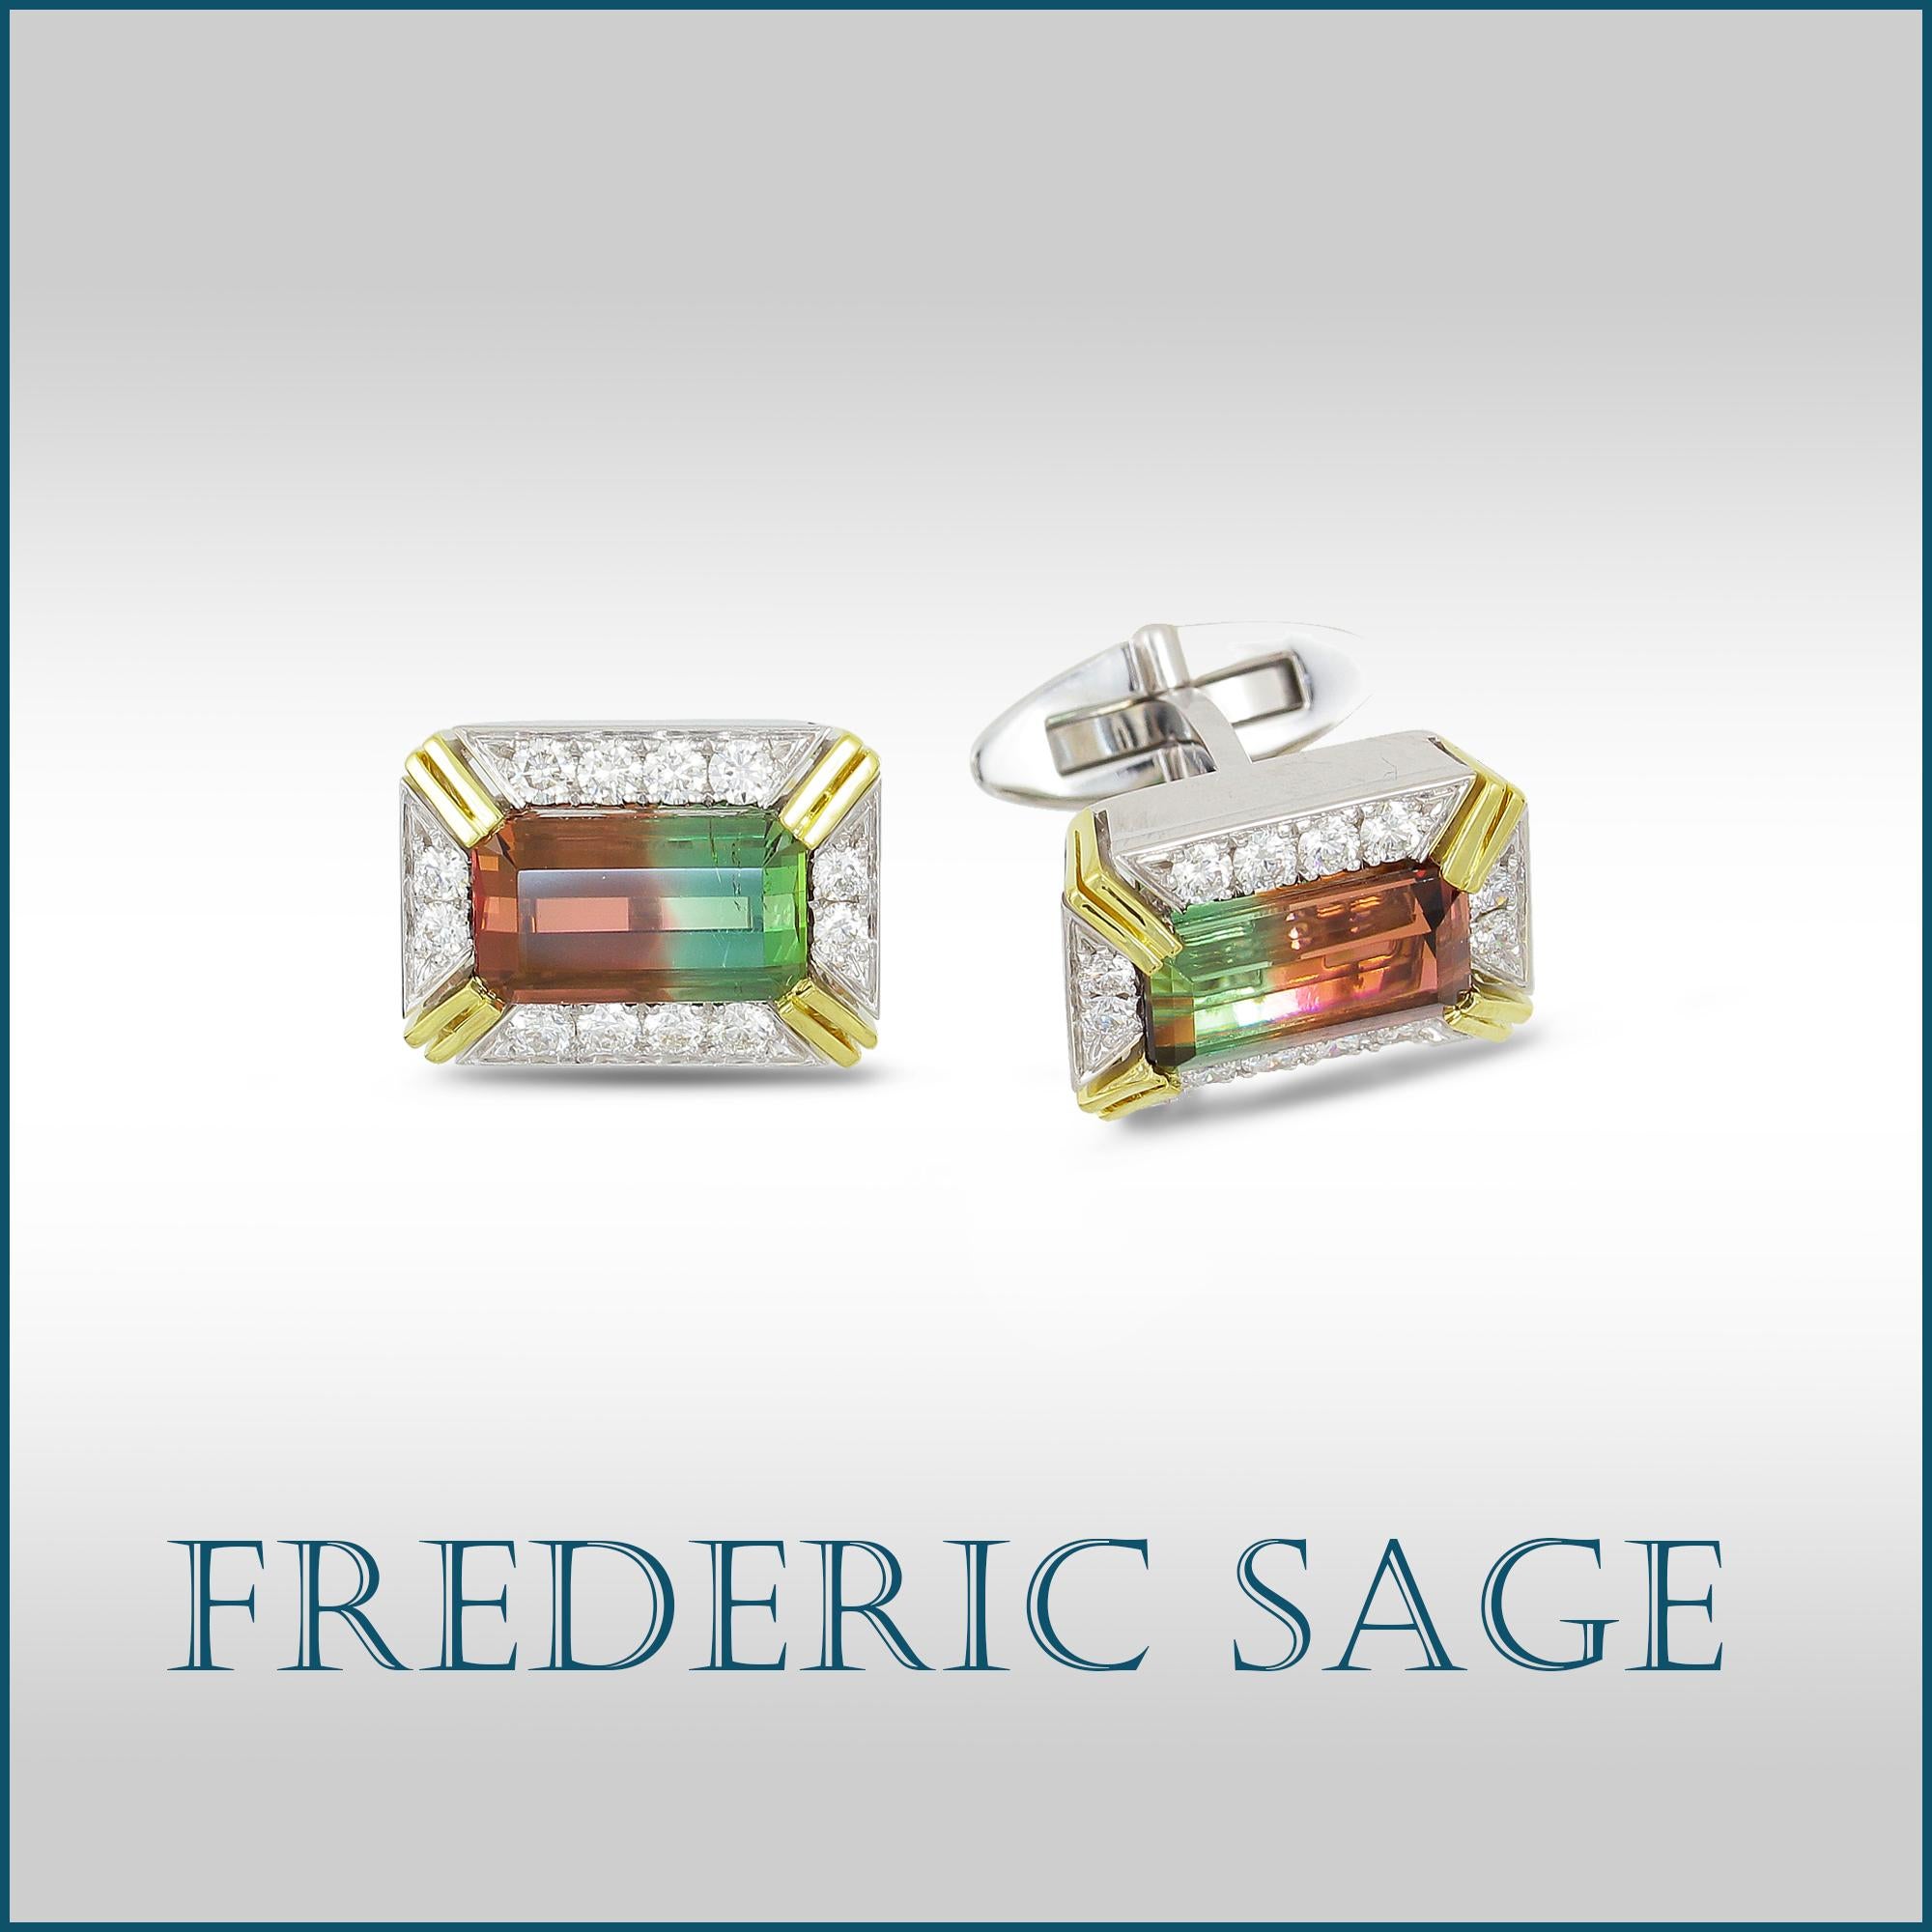 One-of- a kind Frederic Sage Emerald cut Watermelon Tourmaline Cufflinks with diamonds set in 18k White and Yellow Gold. 

Watermelon Tourmaline 9.29 ct
Diamond Count 24
Diamond weight 1.10 ct